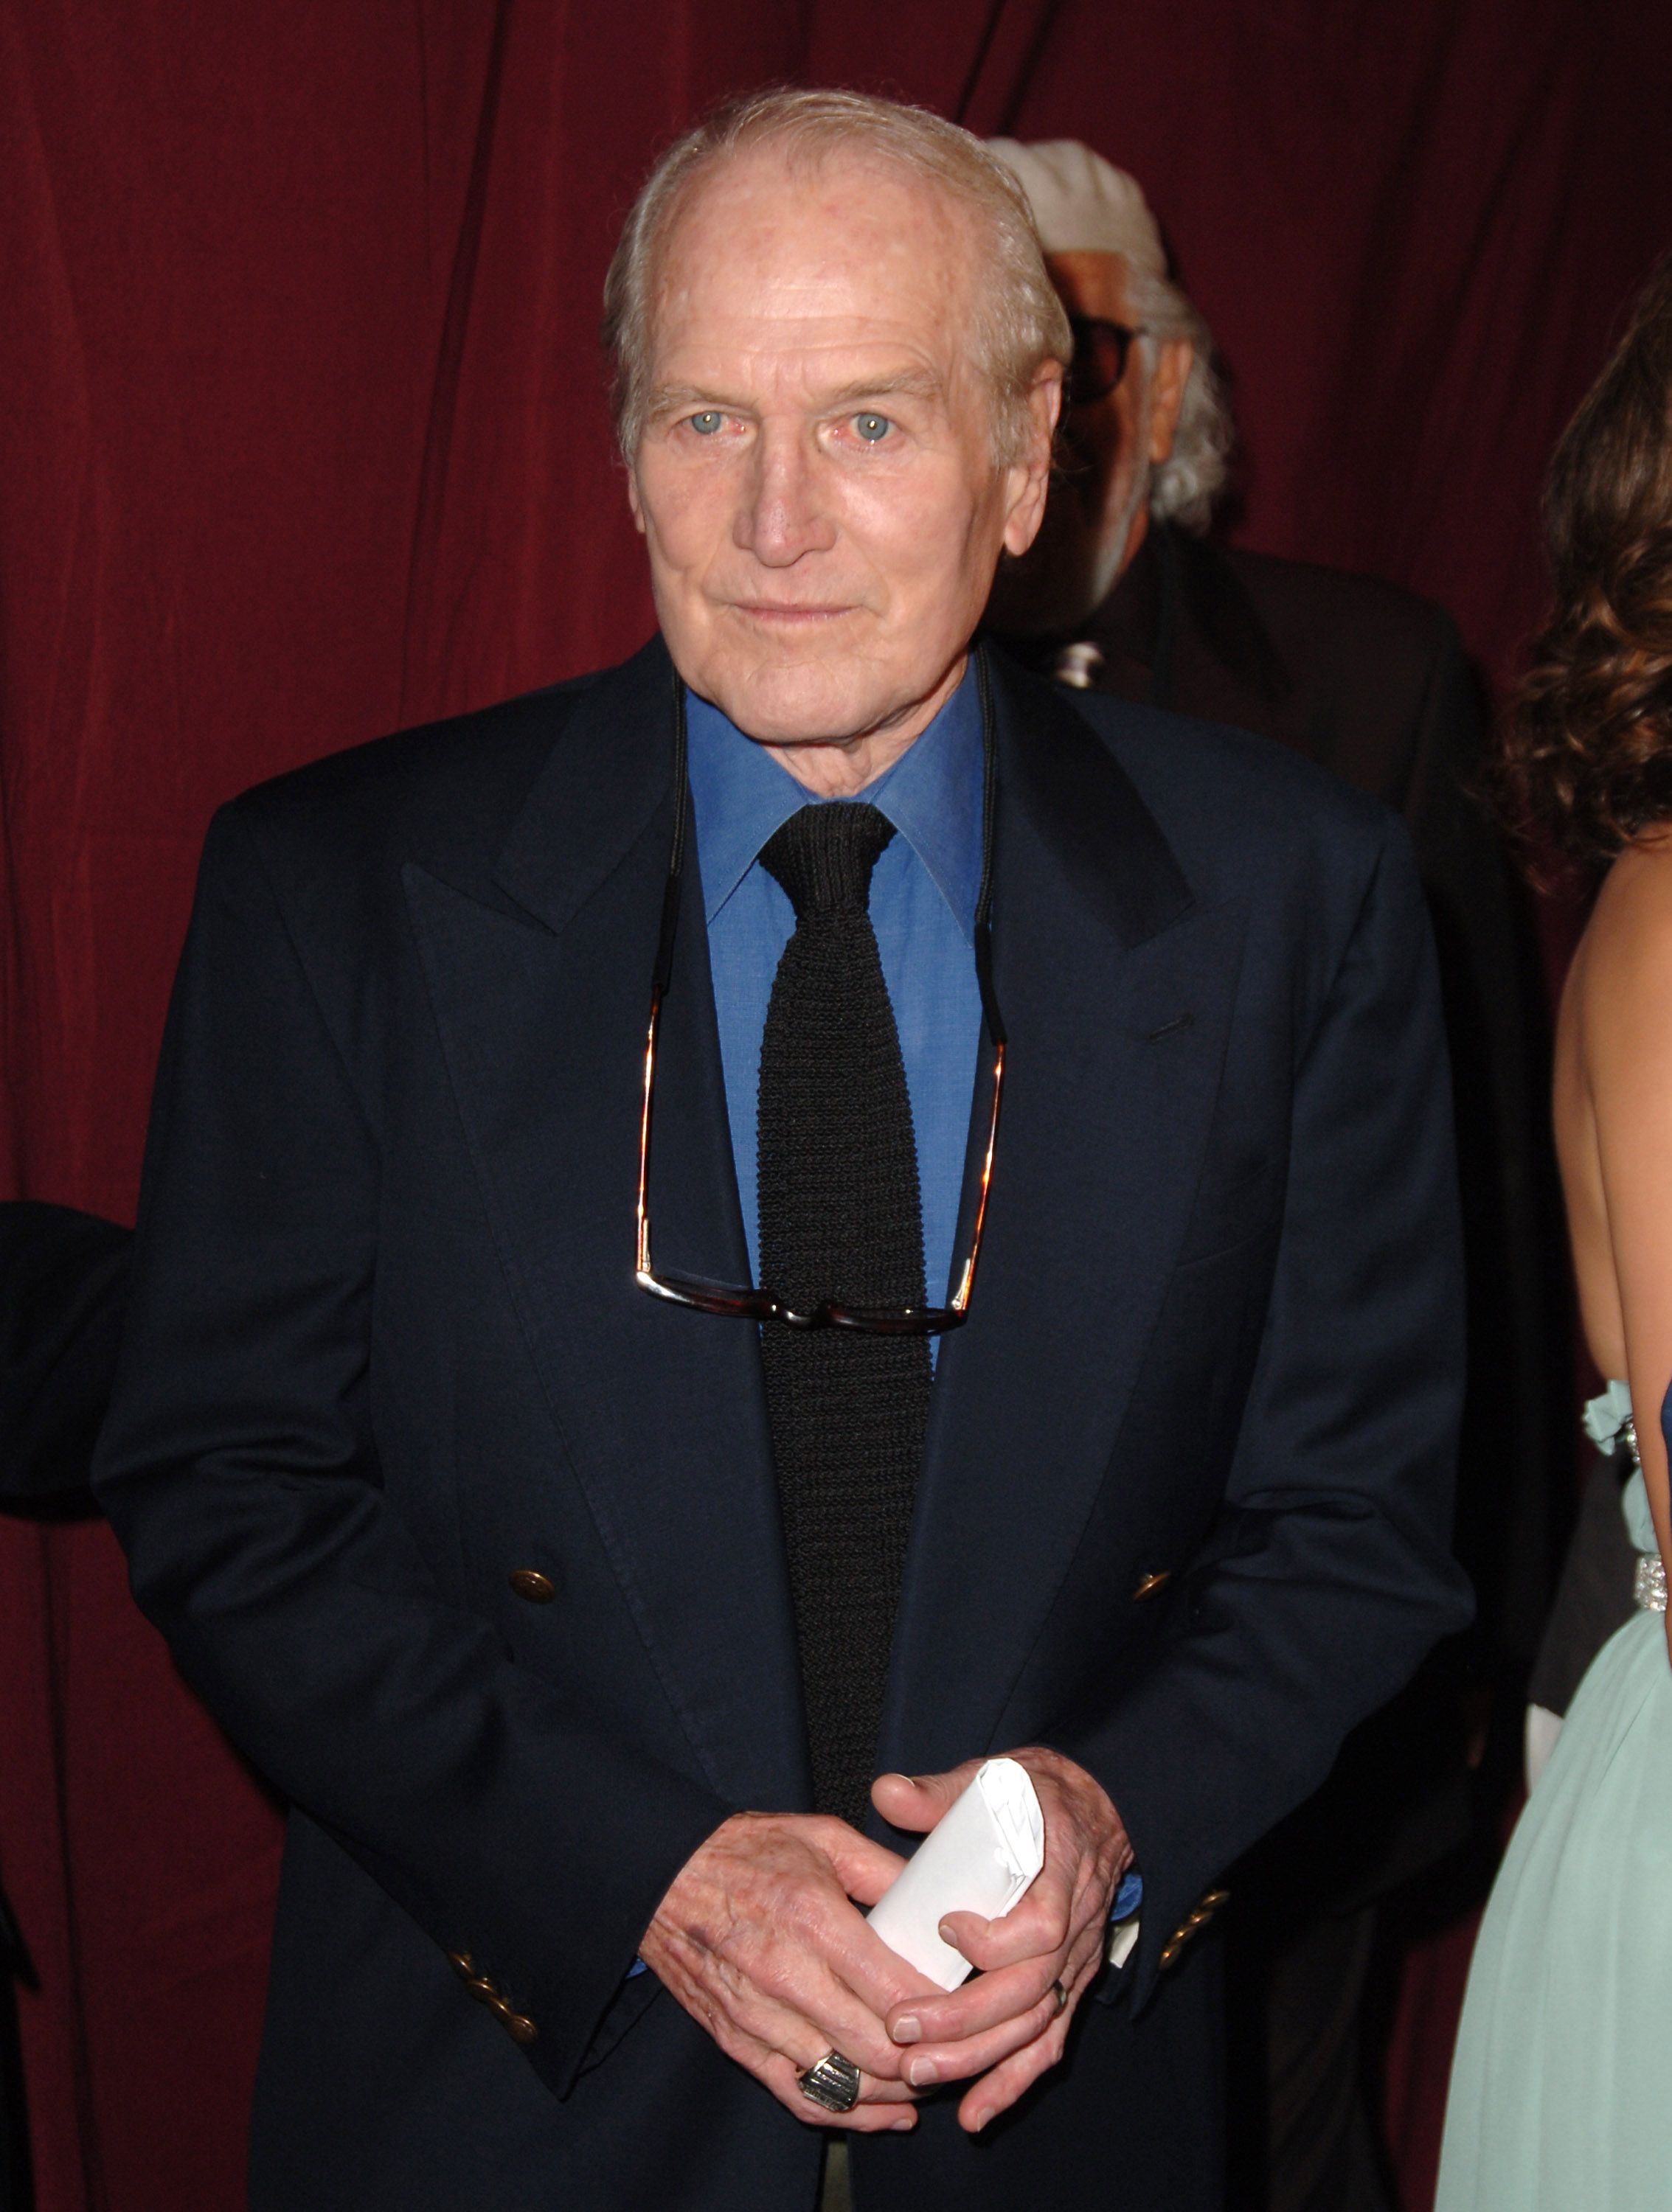 Paul Newman 2006 im Kodak Theatre in Hollywood | Quelle: Getty Images